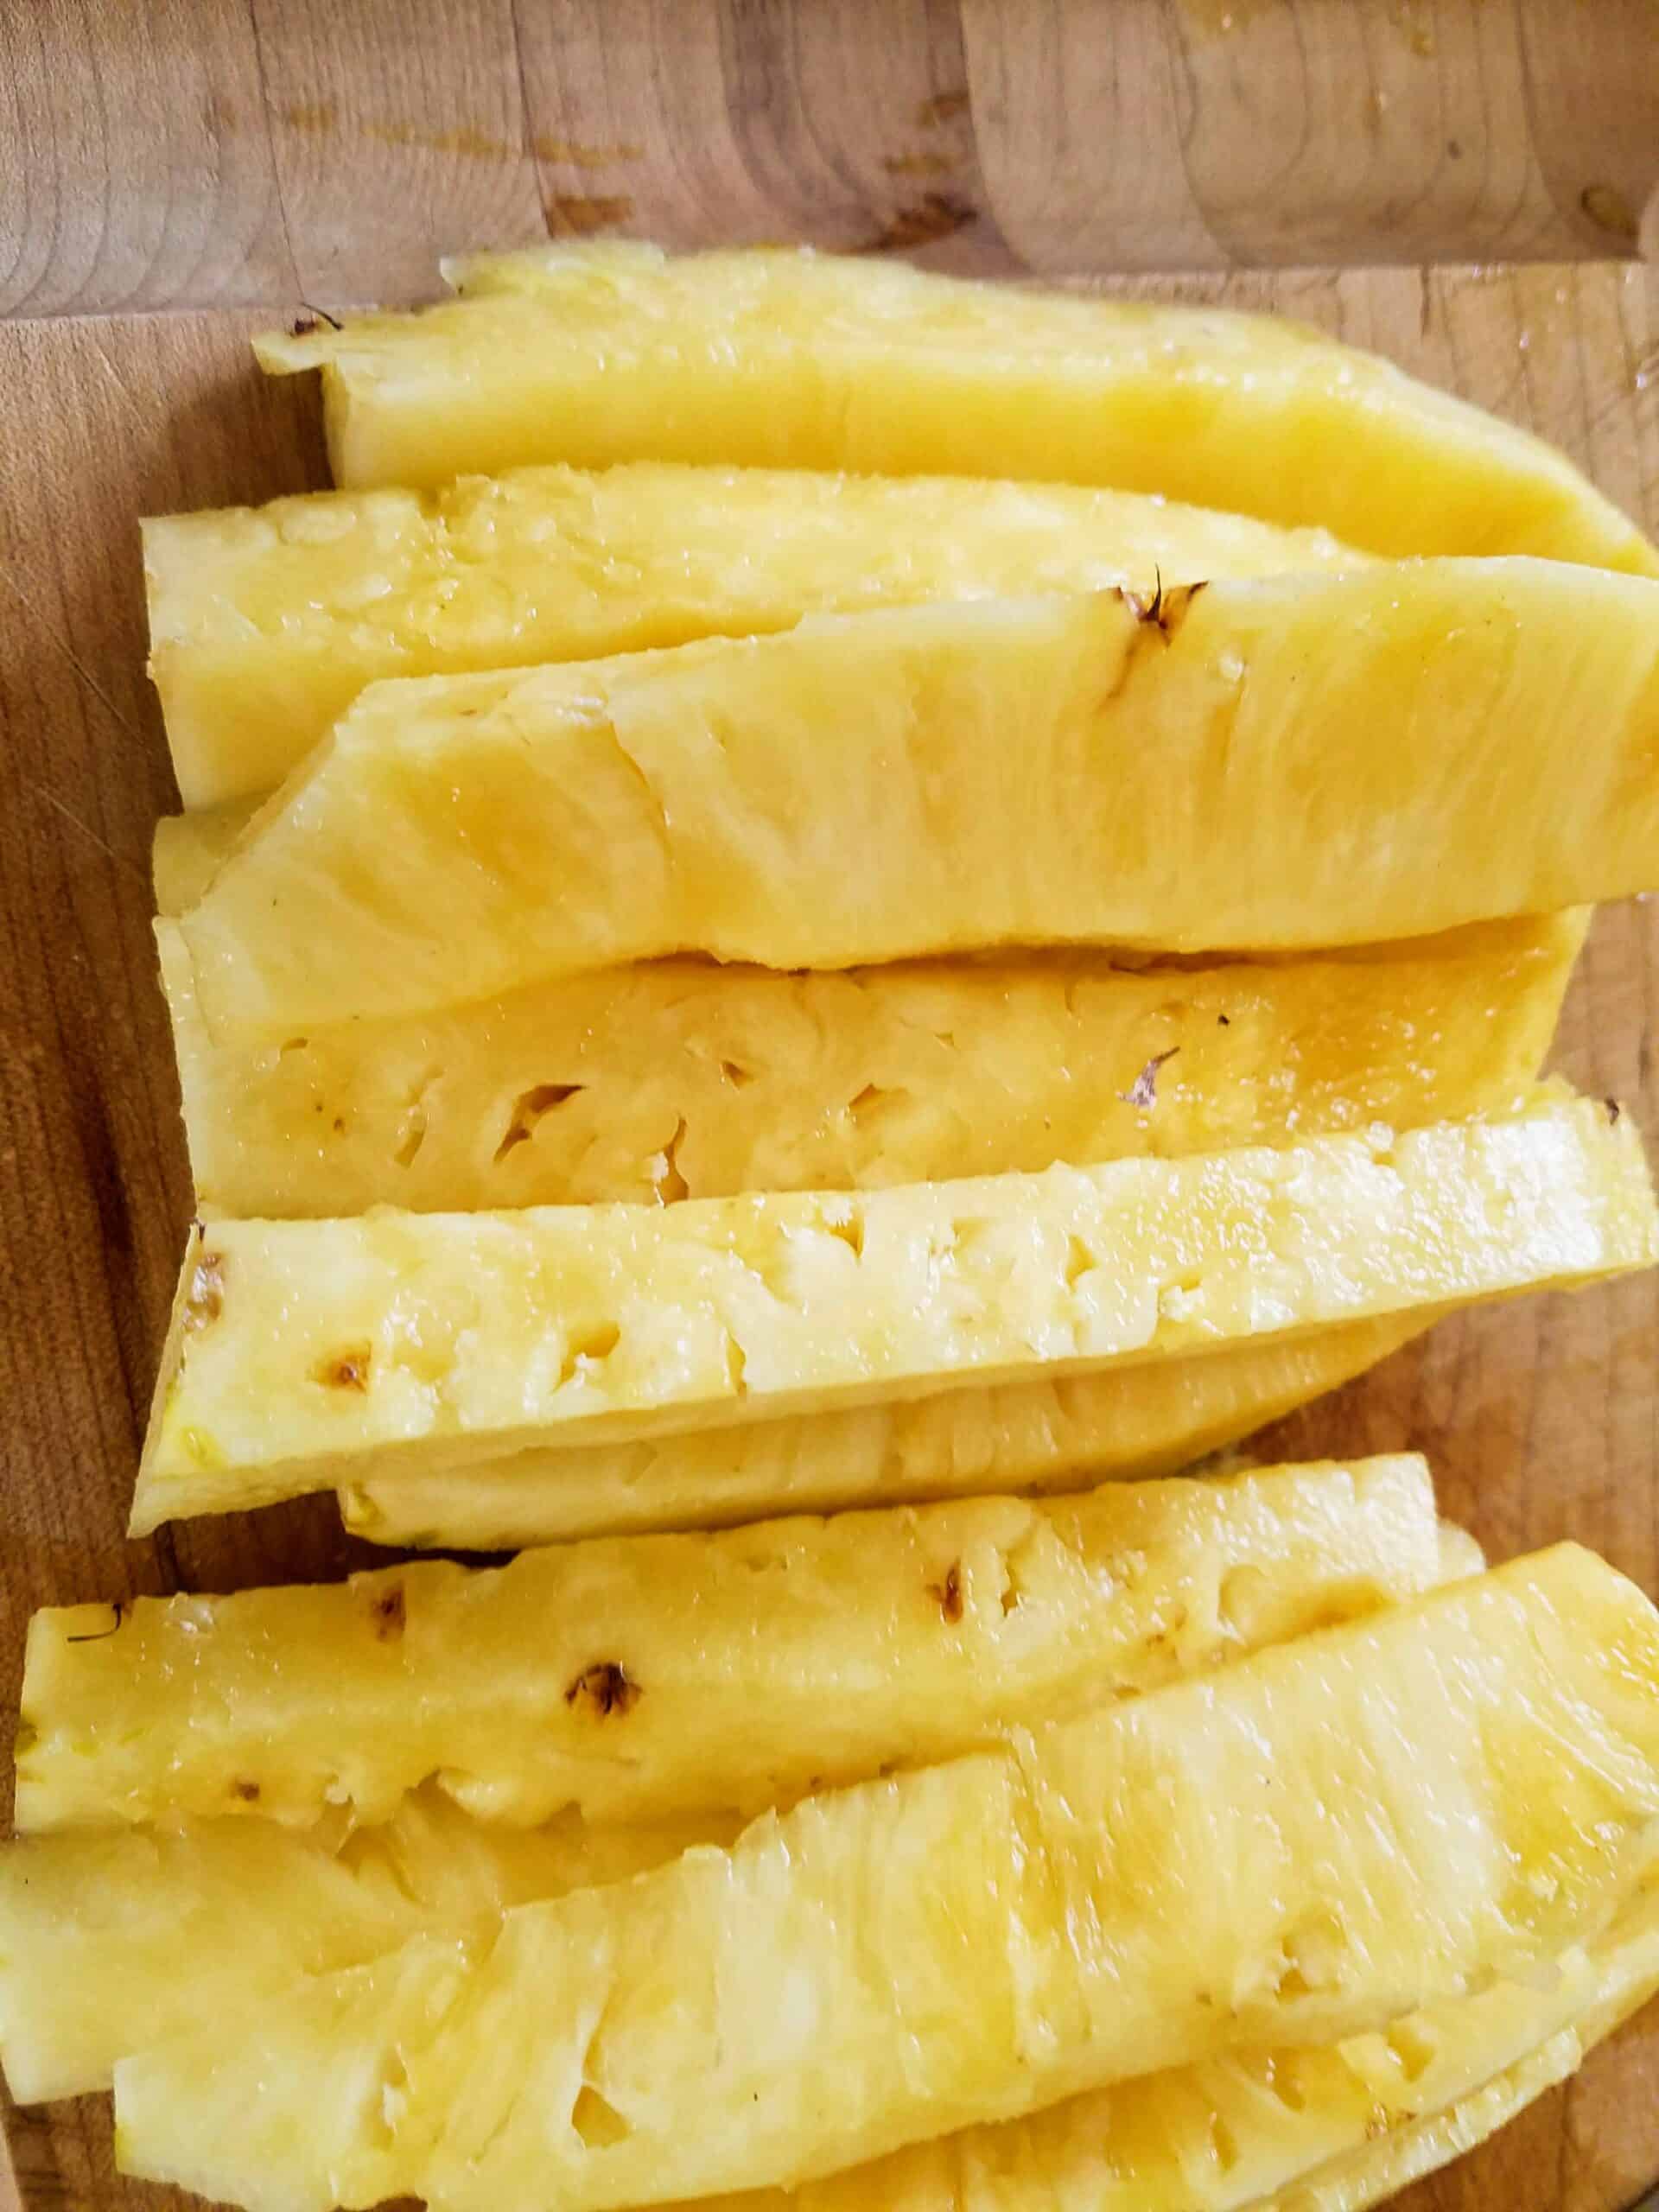 freshly cut pineapple slices on cutting board